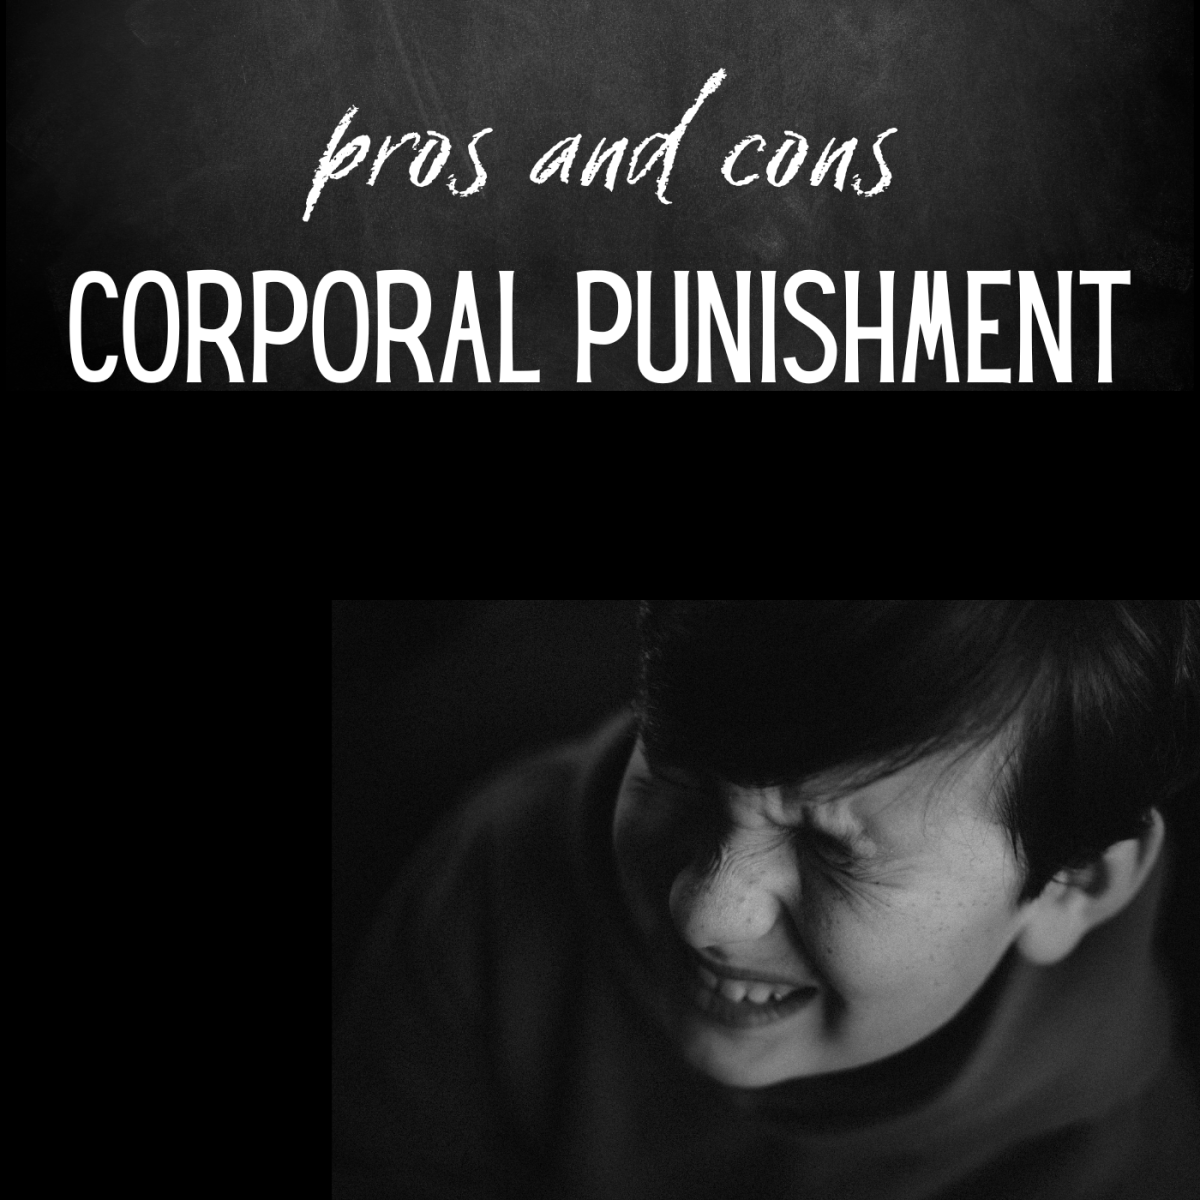 essay on corporal punishment should be banned in schools